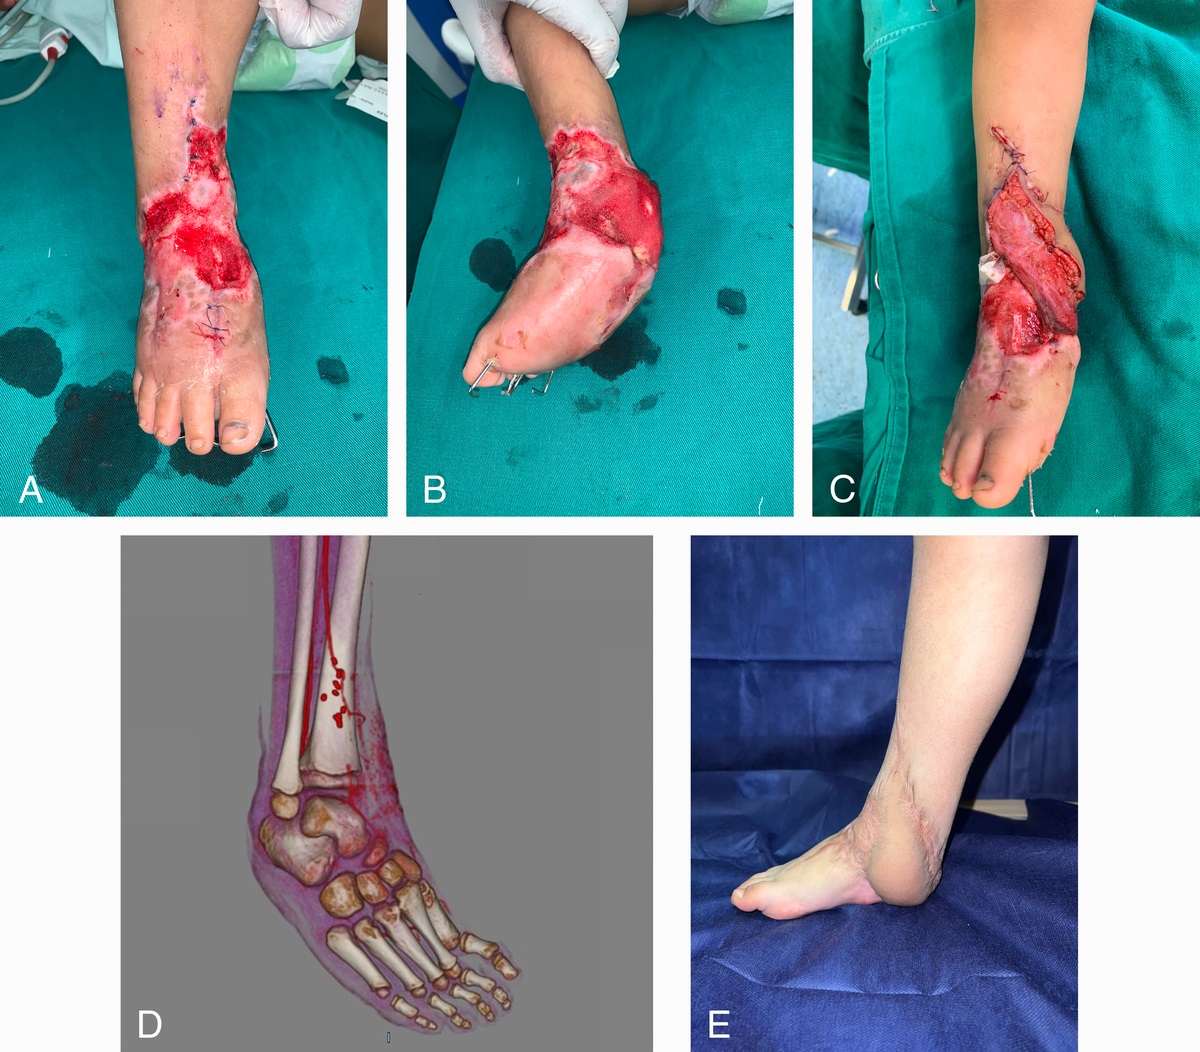 Quality of Life After Lower Leg Reconstruction With the Latissimus Dorsi Free Flap in Pediatric Patients